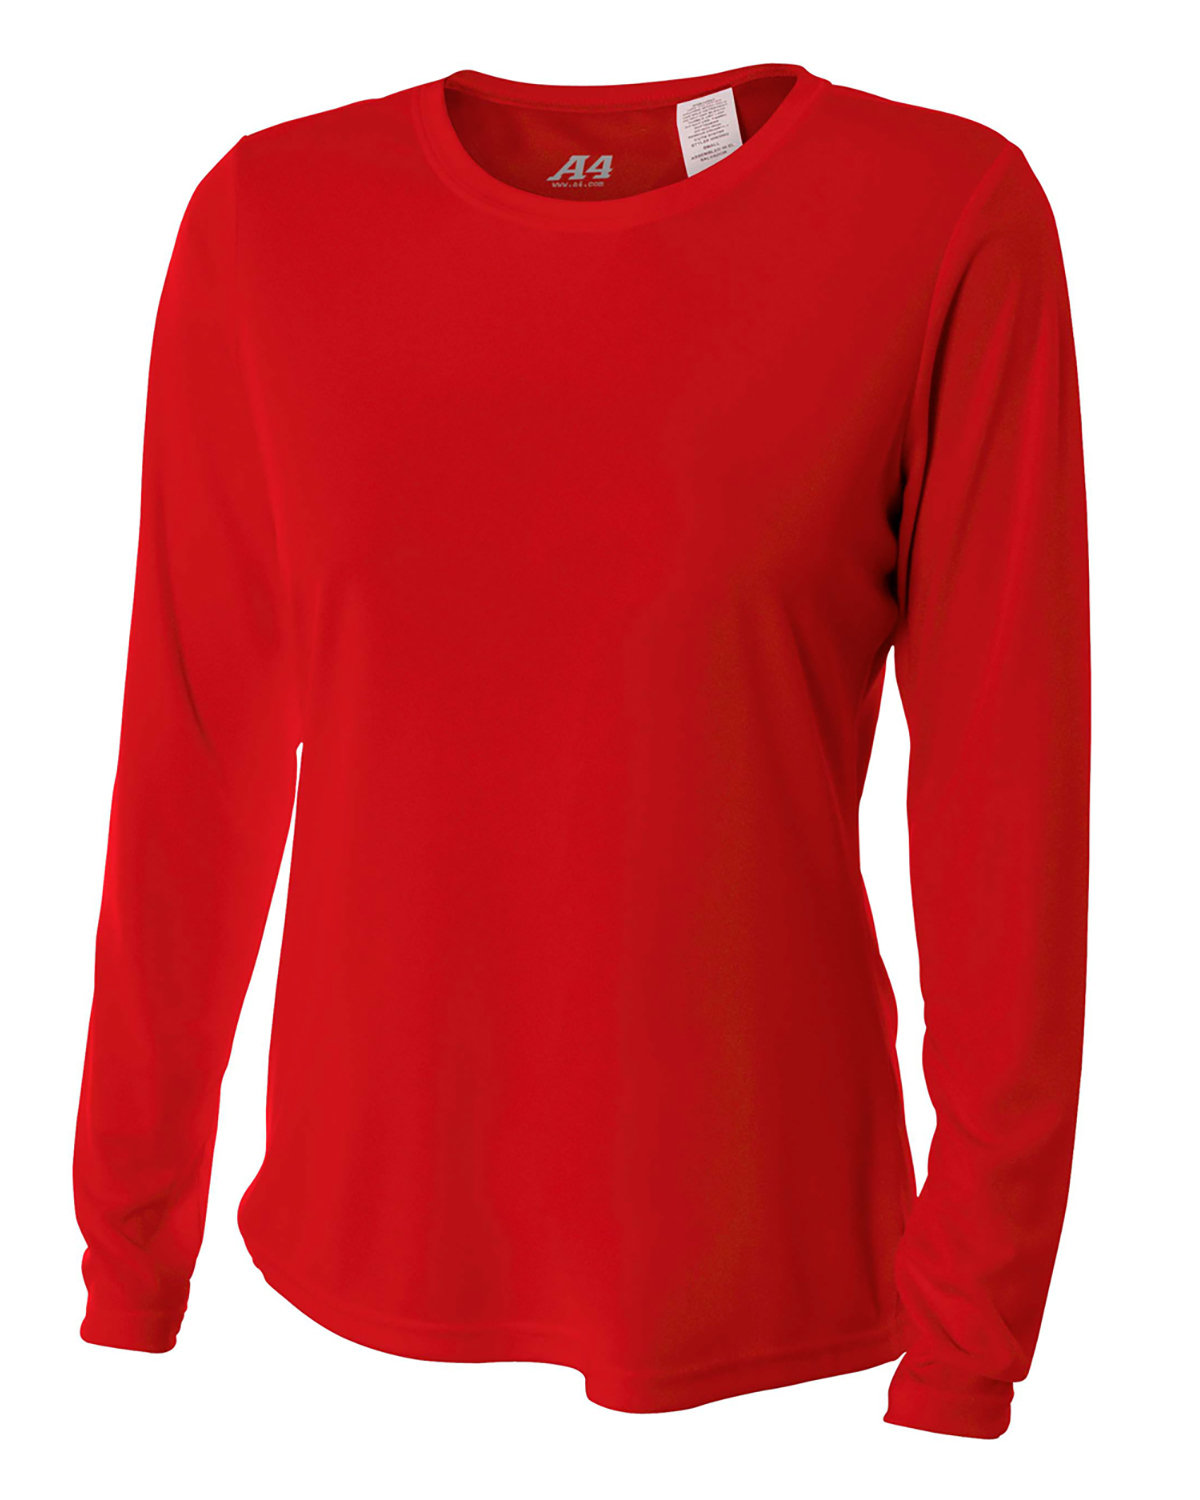 A4 Ladies' Long Sleeve Cooling Performance Crew Shirt SCARLET 